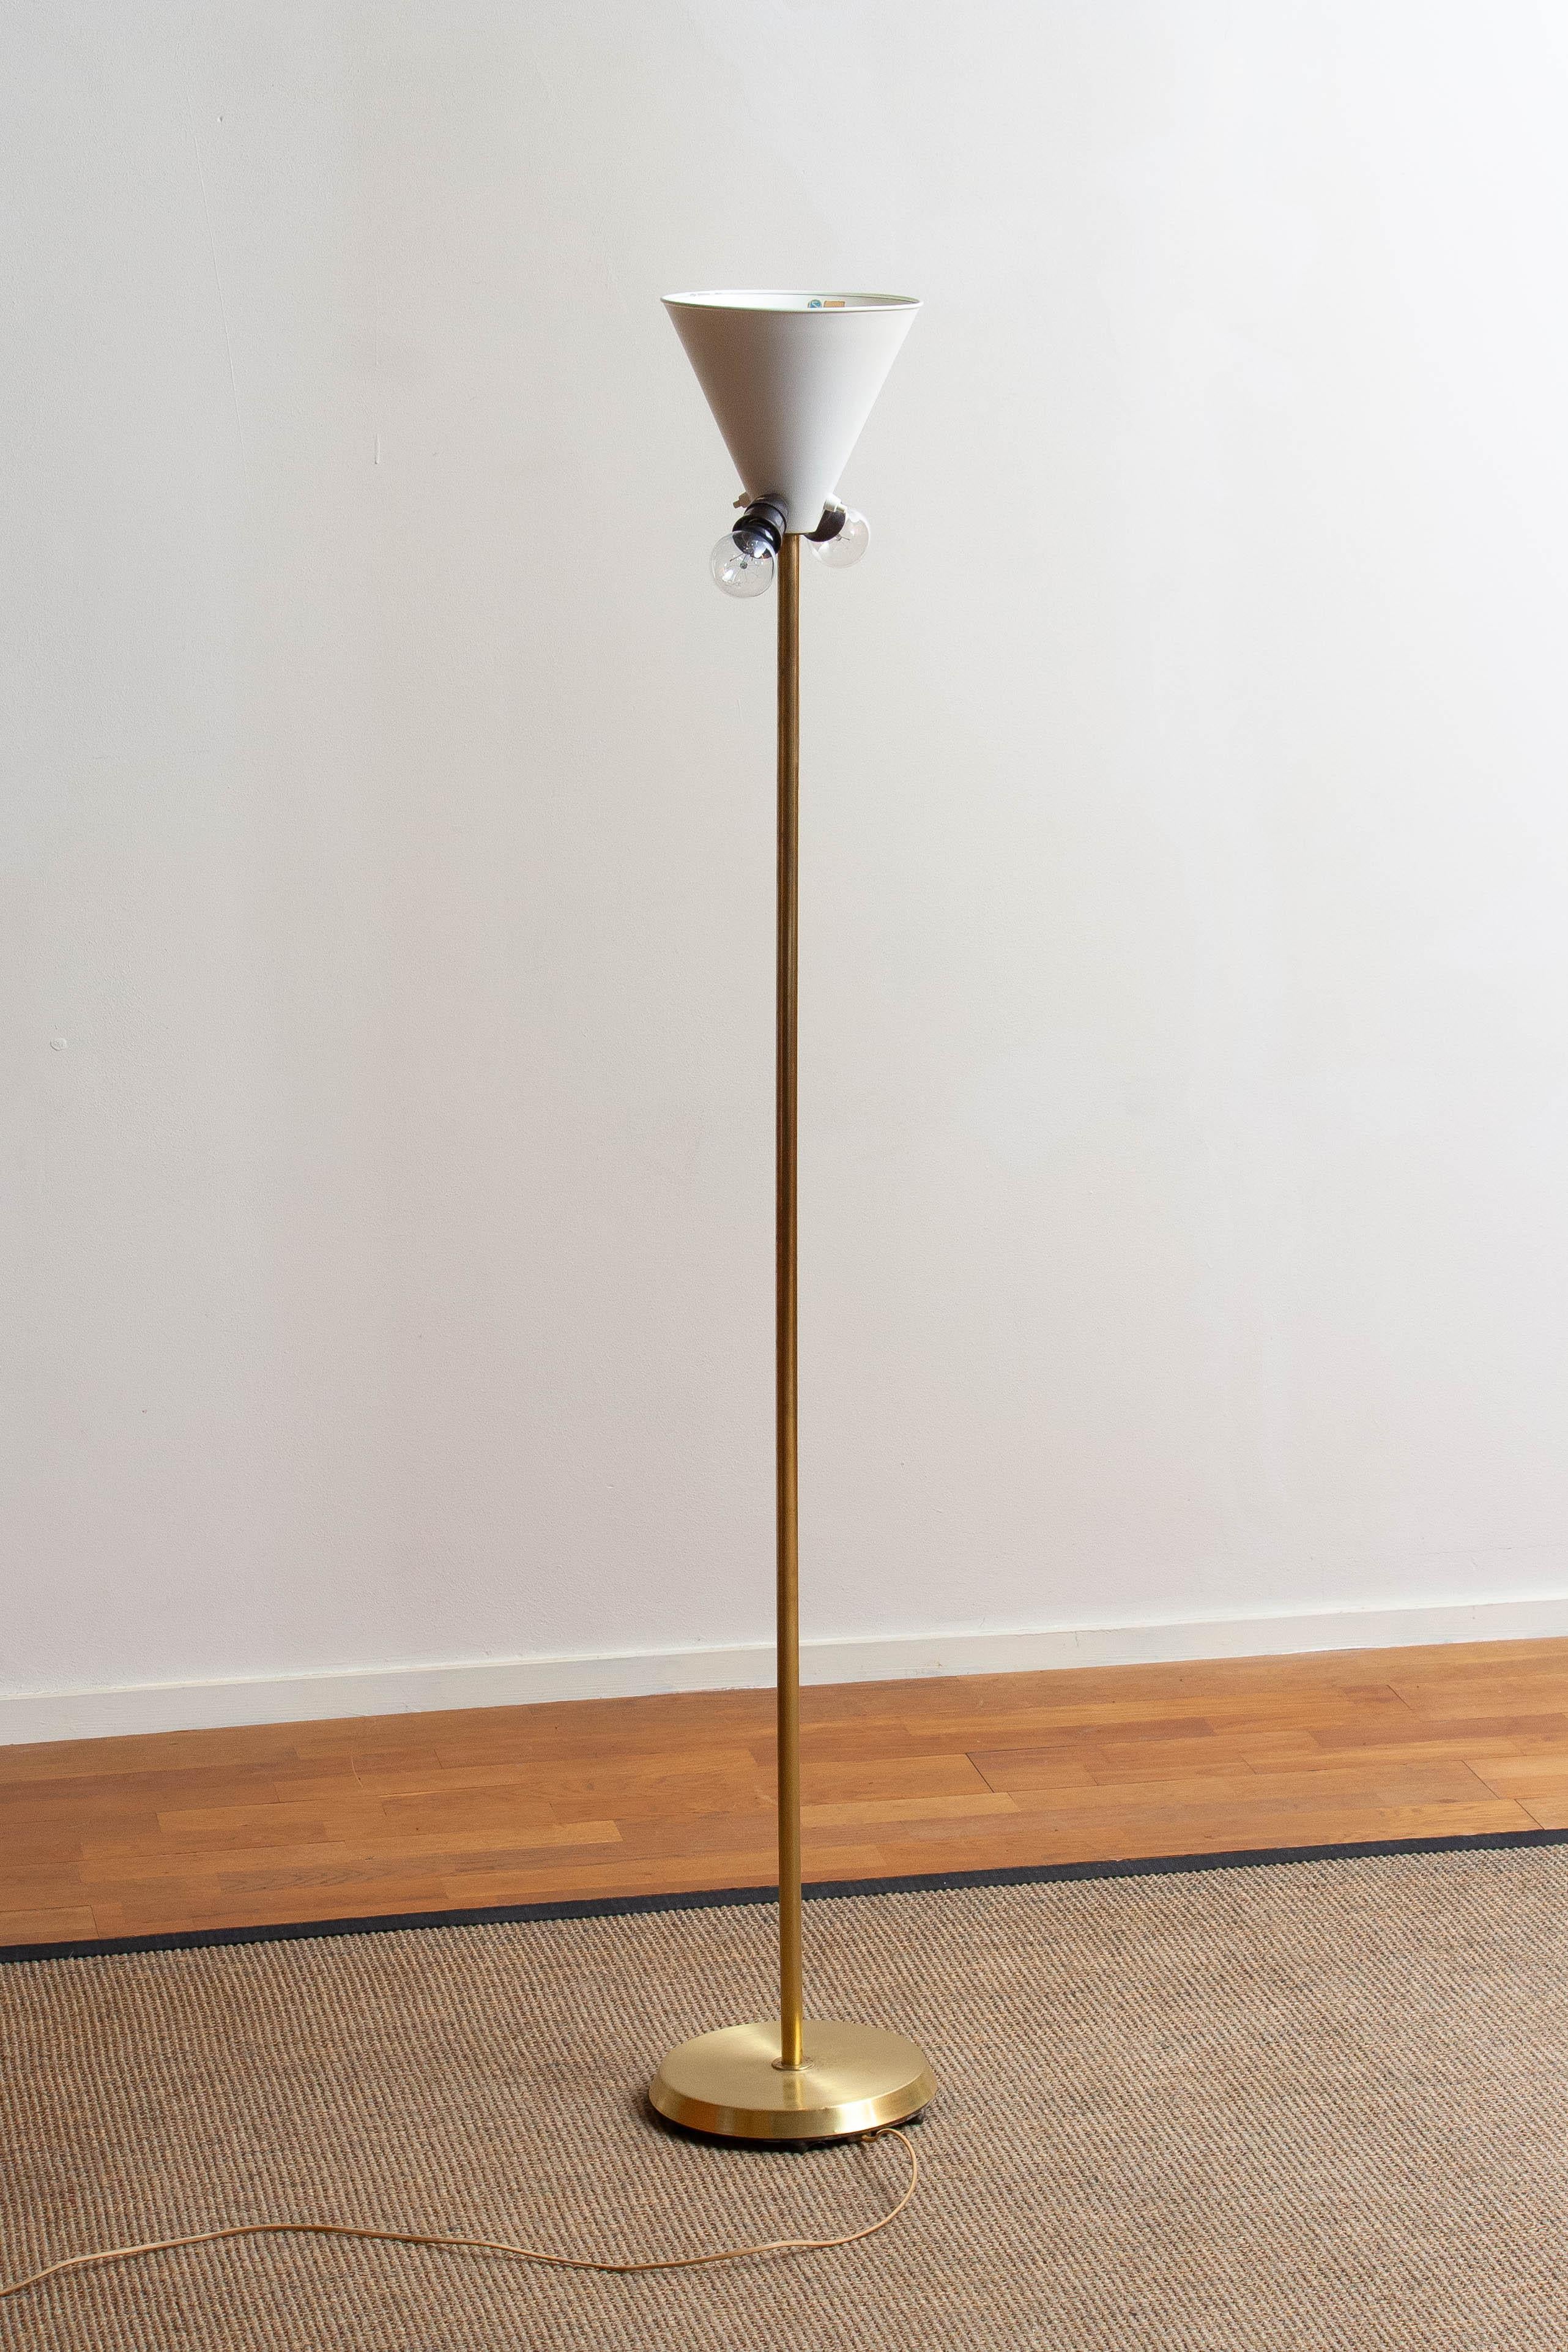 1950s, Up-Light Floor Lamp in Brass and Metal by Fagerhults Belysning, Sweden 3